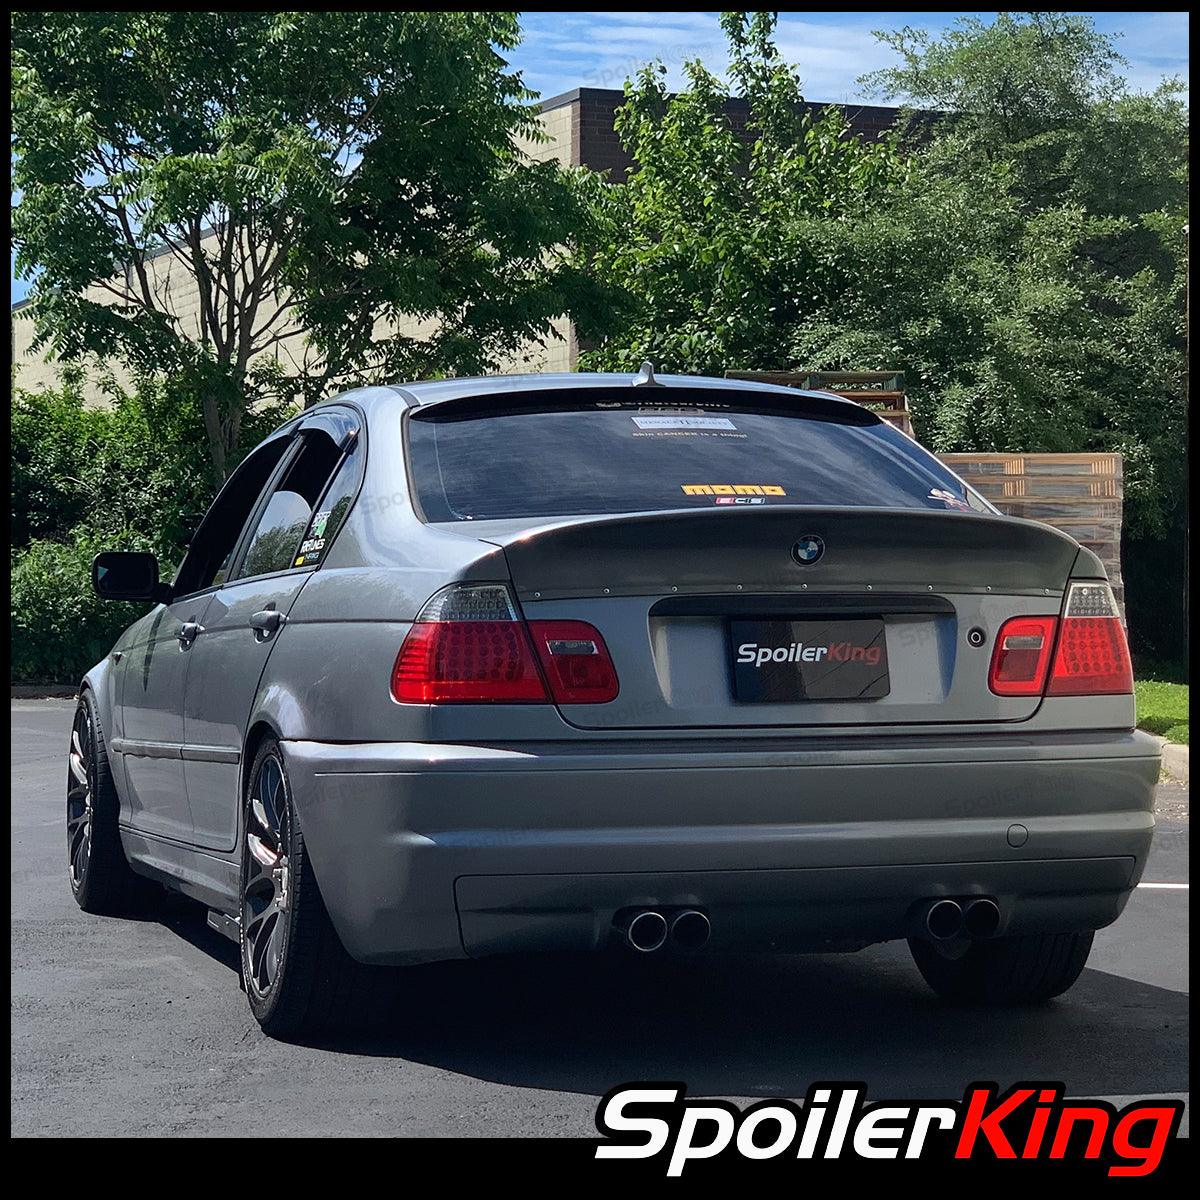 BMW 3 Series E46 4dr 1998-2006 Rear Window Roof Spoiler (284R)